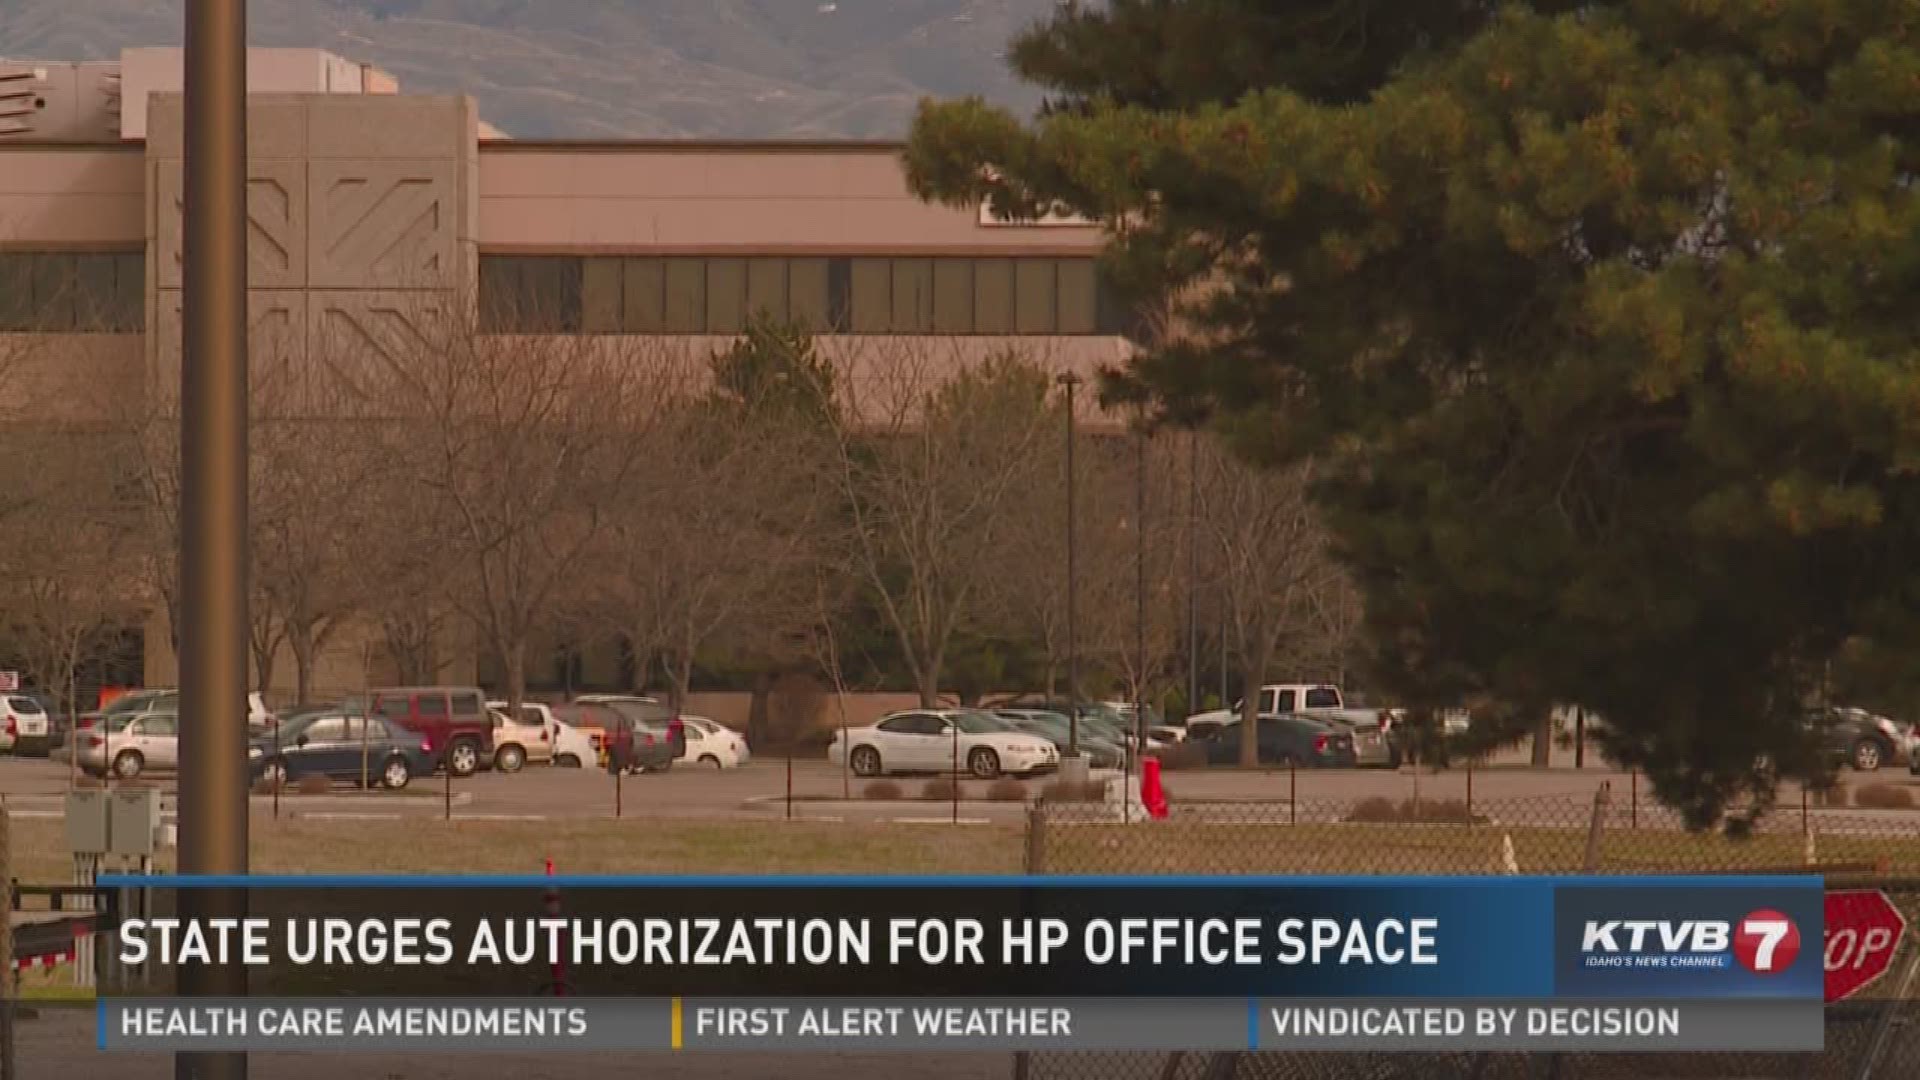 State urges authorization for HP office space.